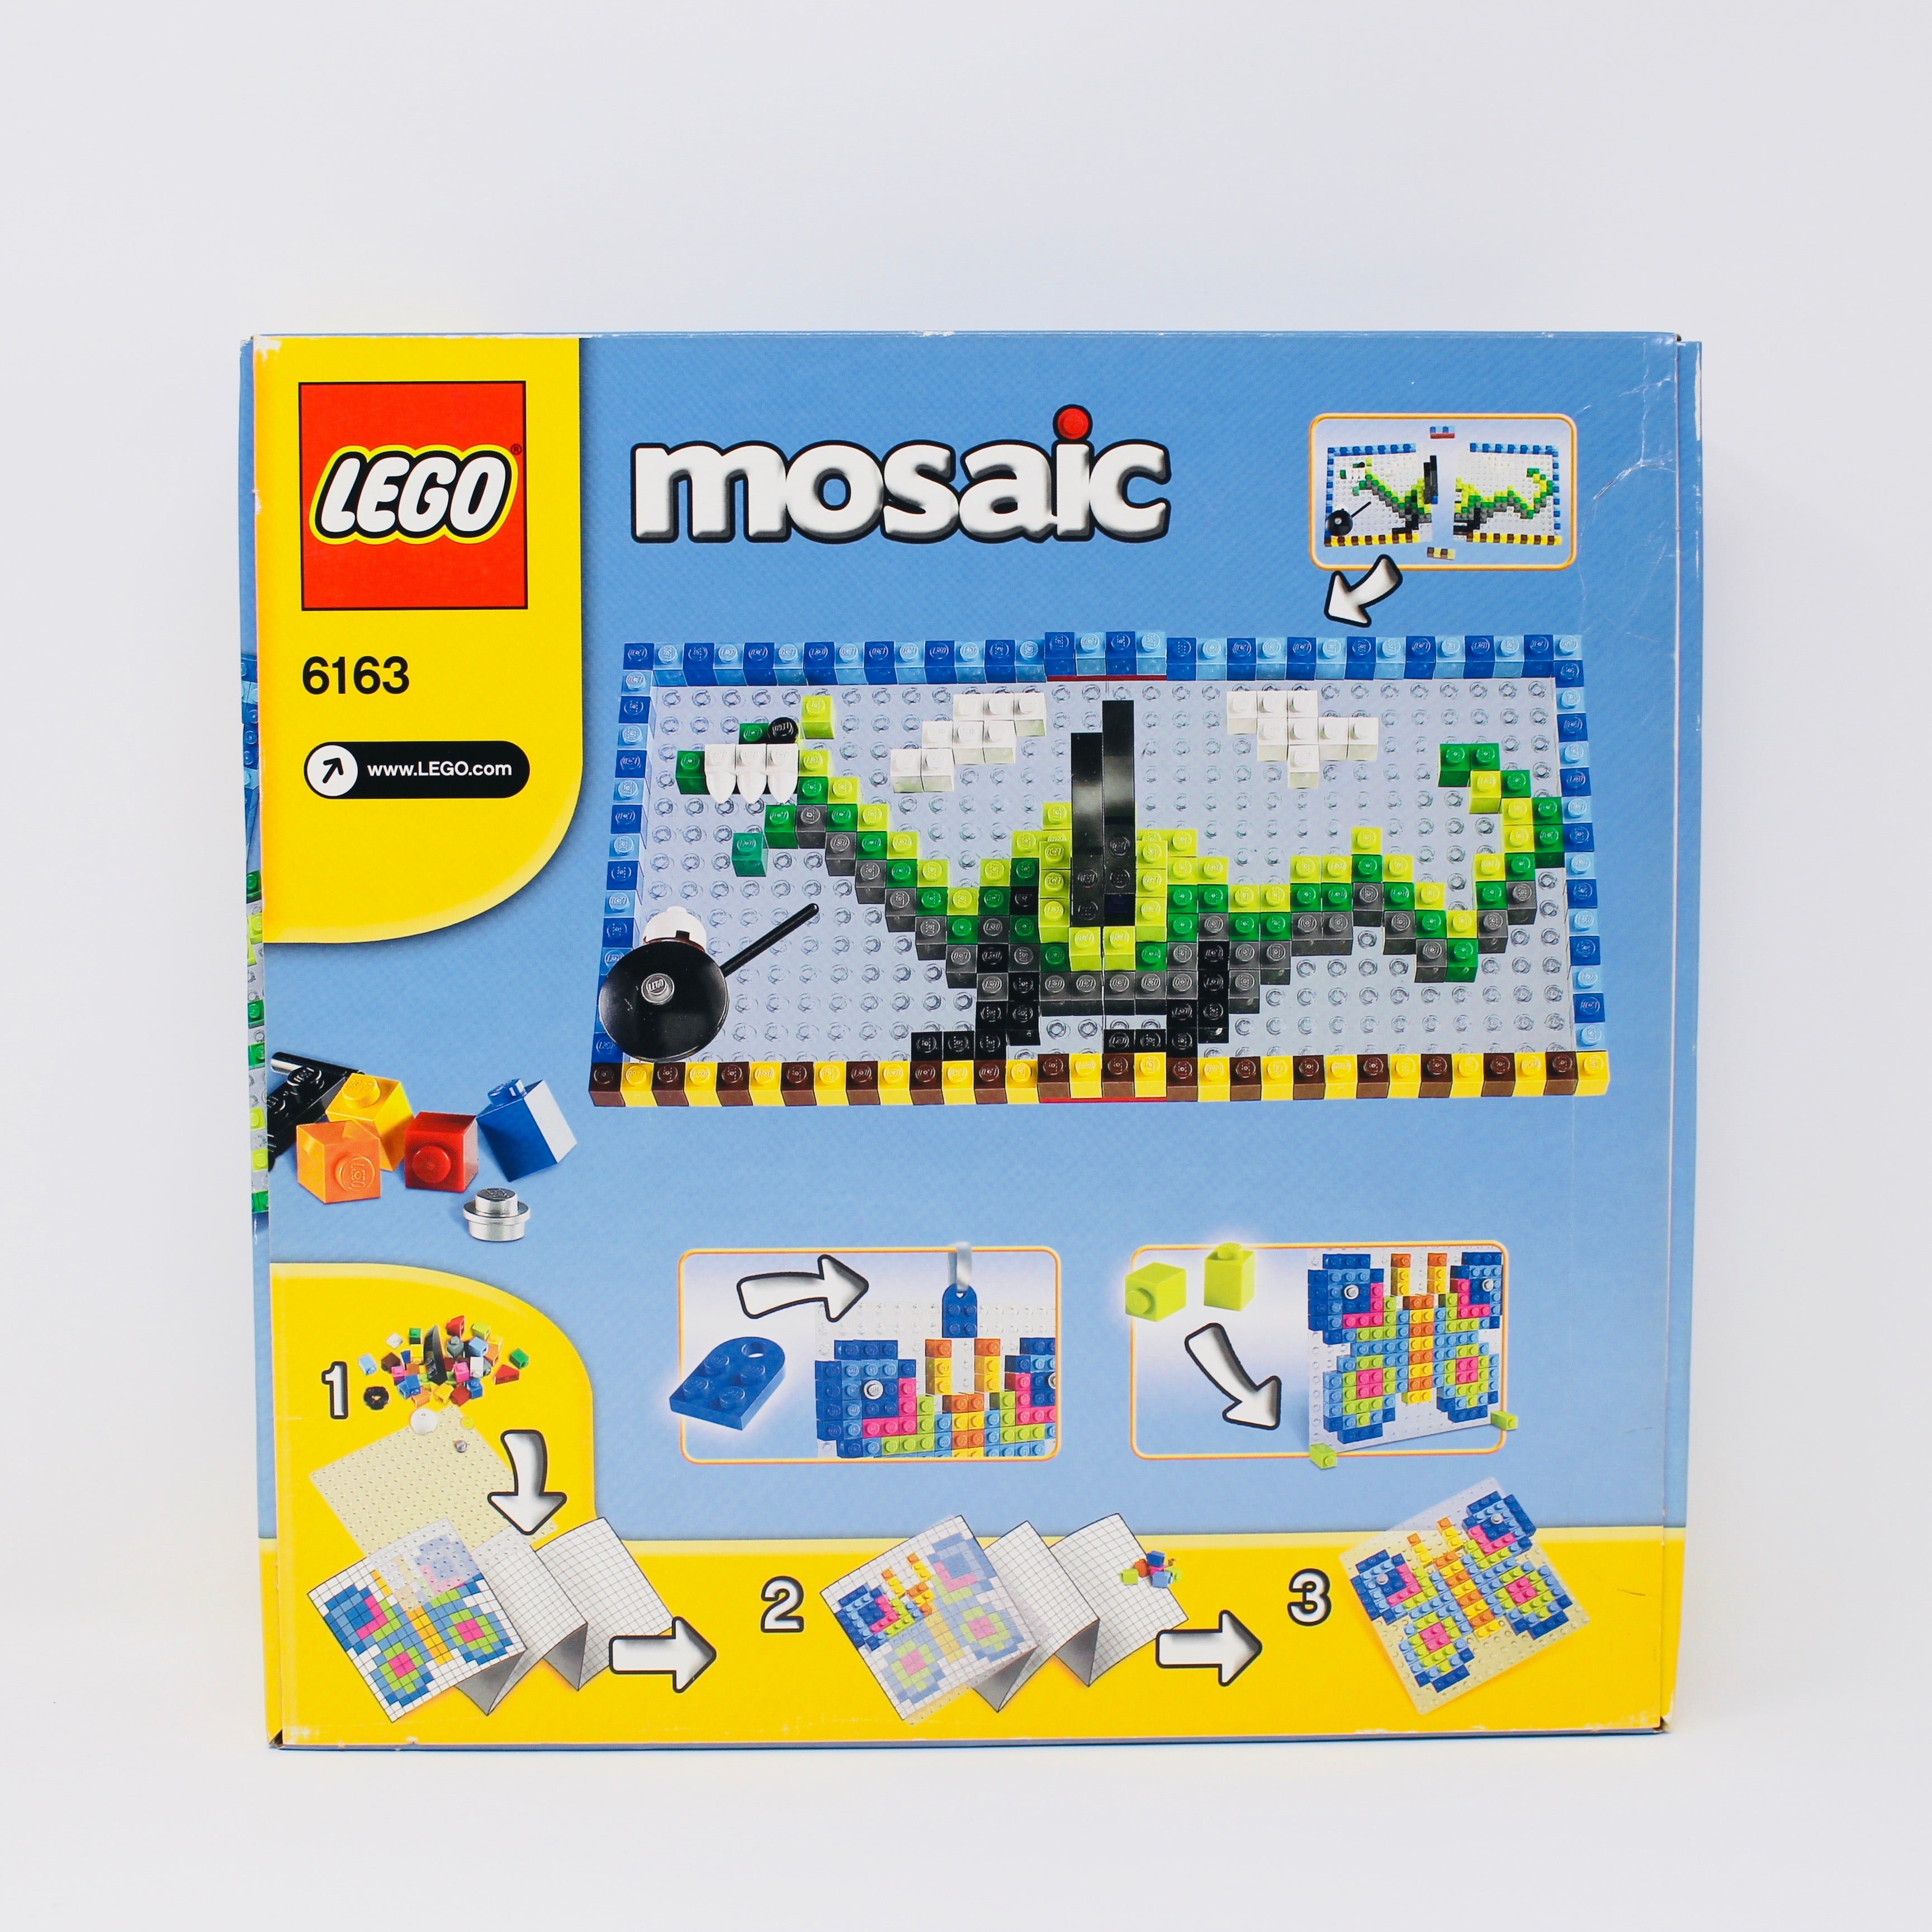 Retired Set 6163 A World of LEGO Mosaic 9-in-1